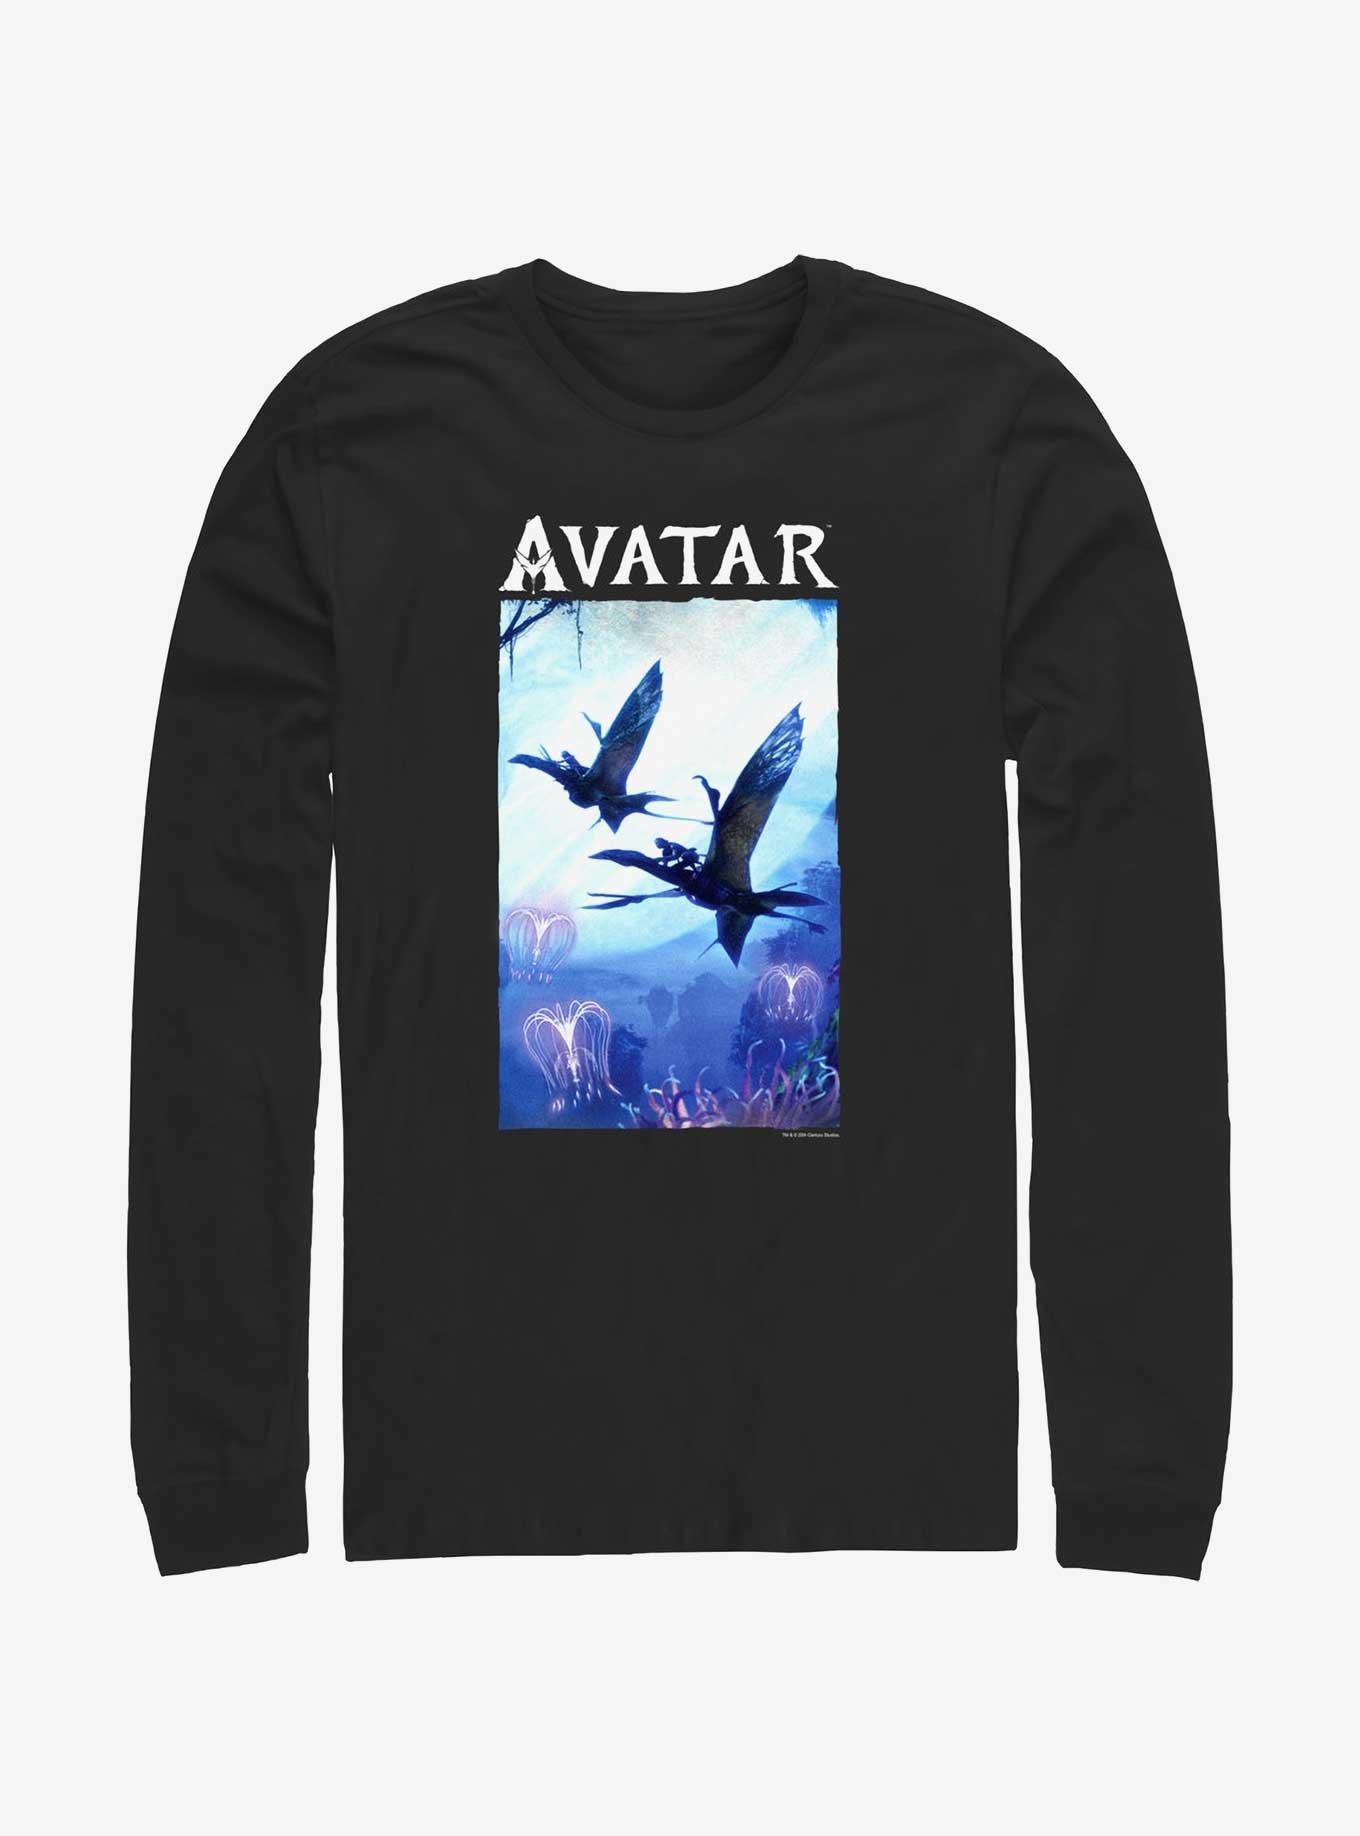 Avatar: The Way of Water Air Time Poster Long-Sleeve T-Shirt, BLACK, hi-res